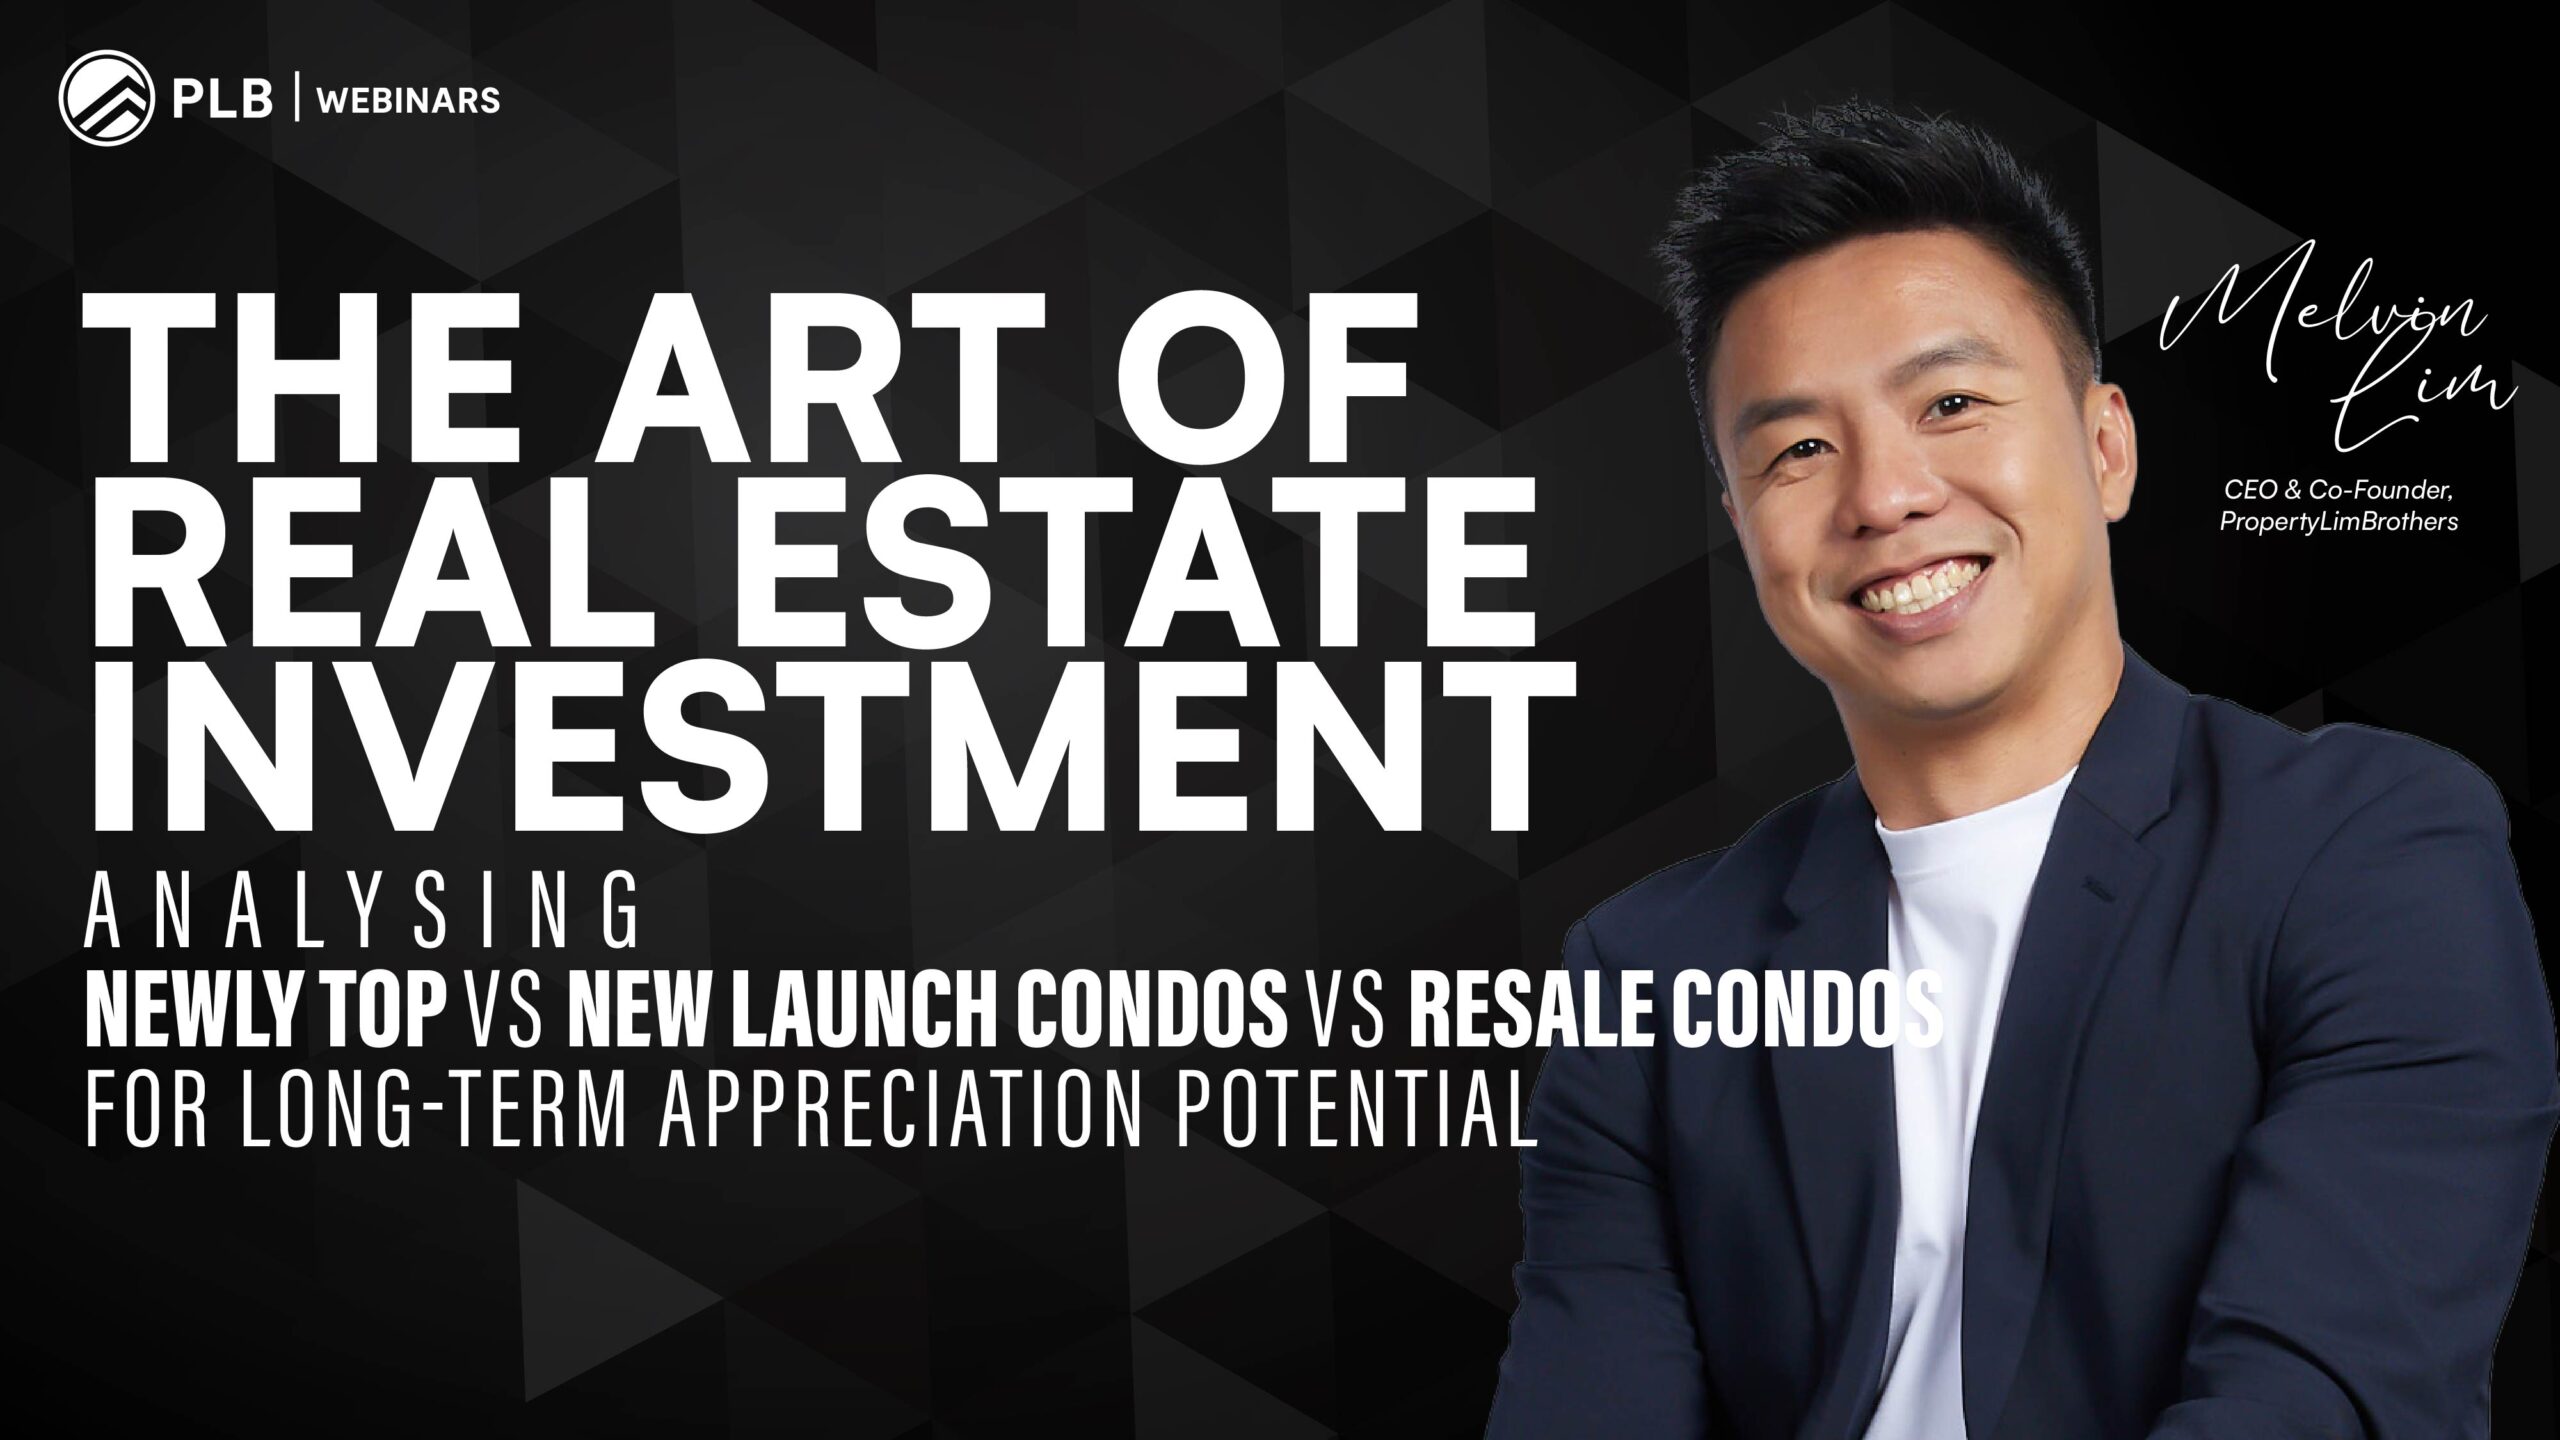 The Art of Real Estate Investment